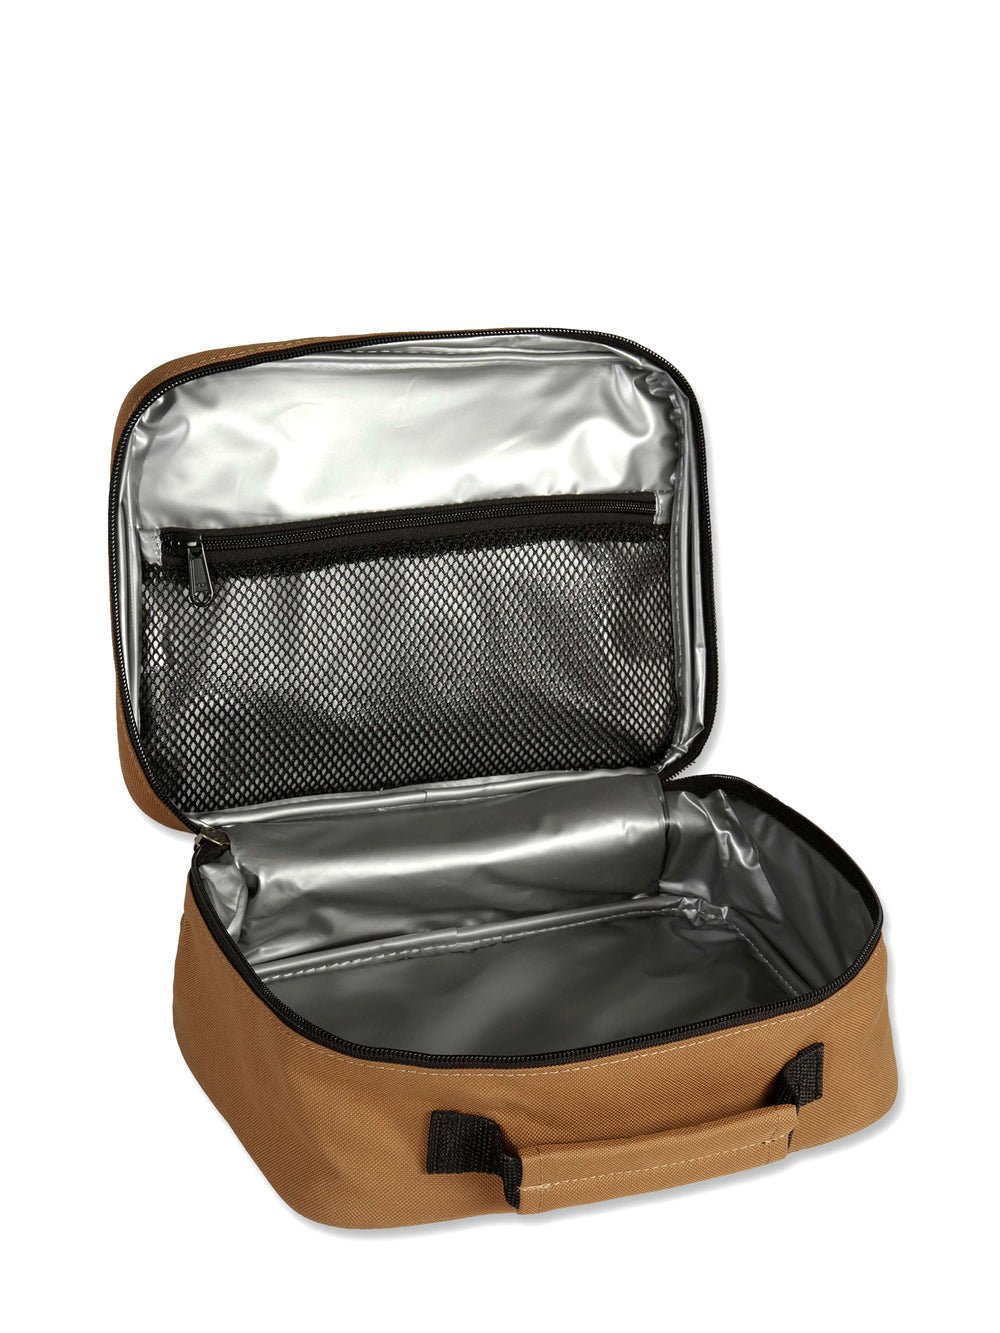 CARHARTT INS LUNCH COOLER - CLEARANCE